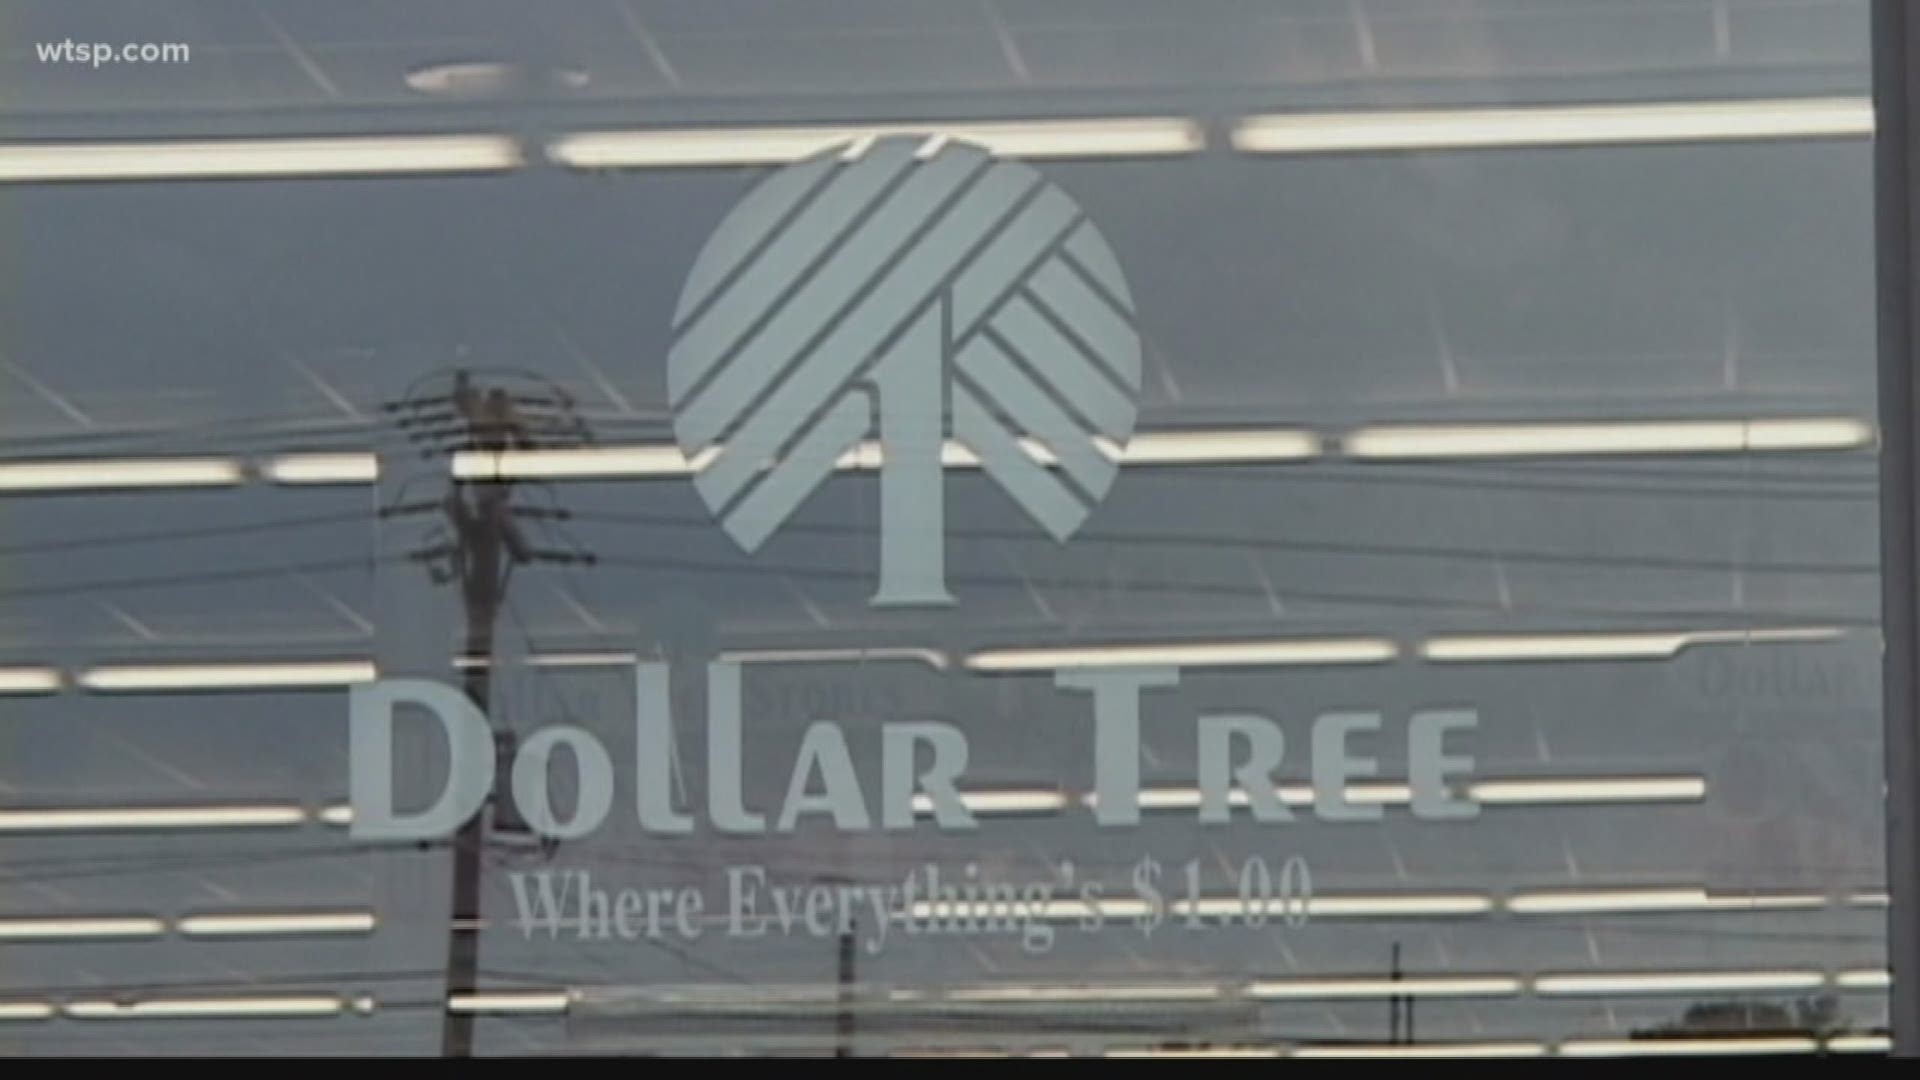 The over-the-counter drugs were sold under Dollar Tree's "Assured" brand.o